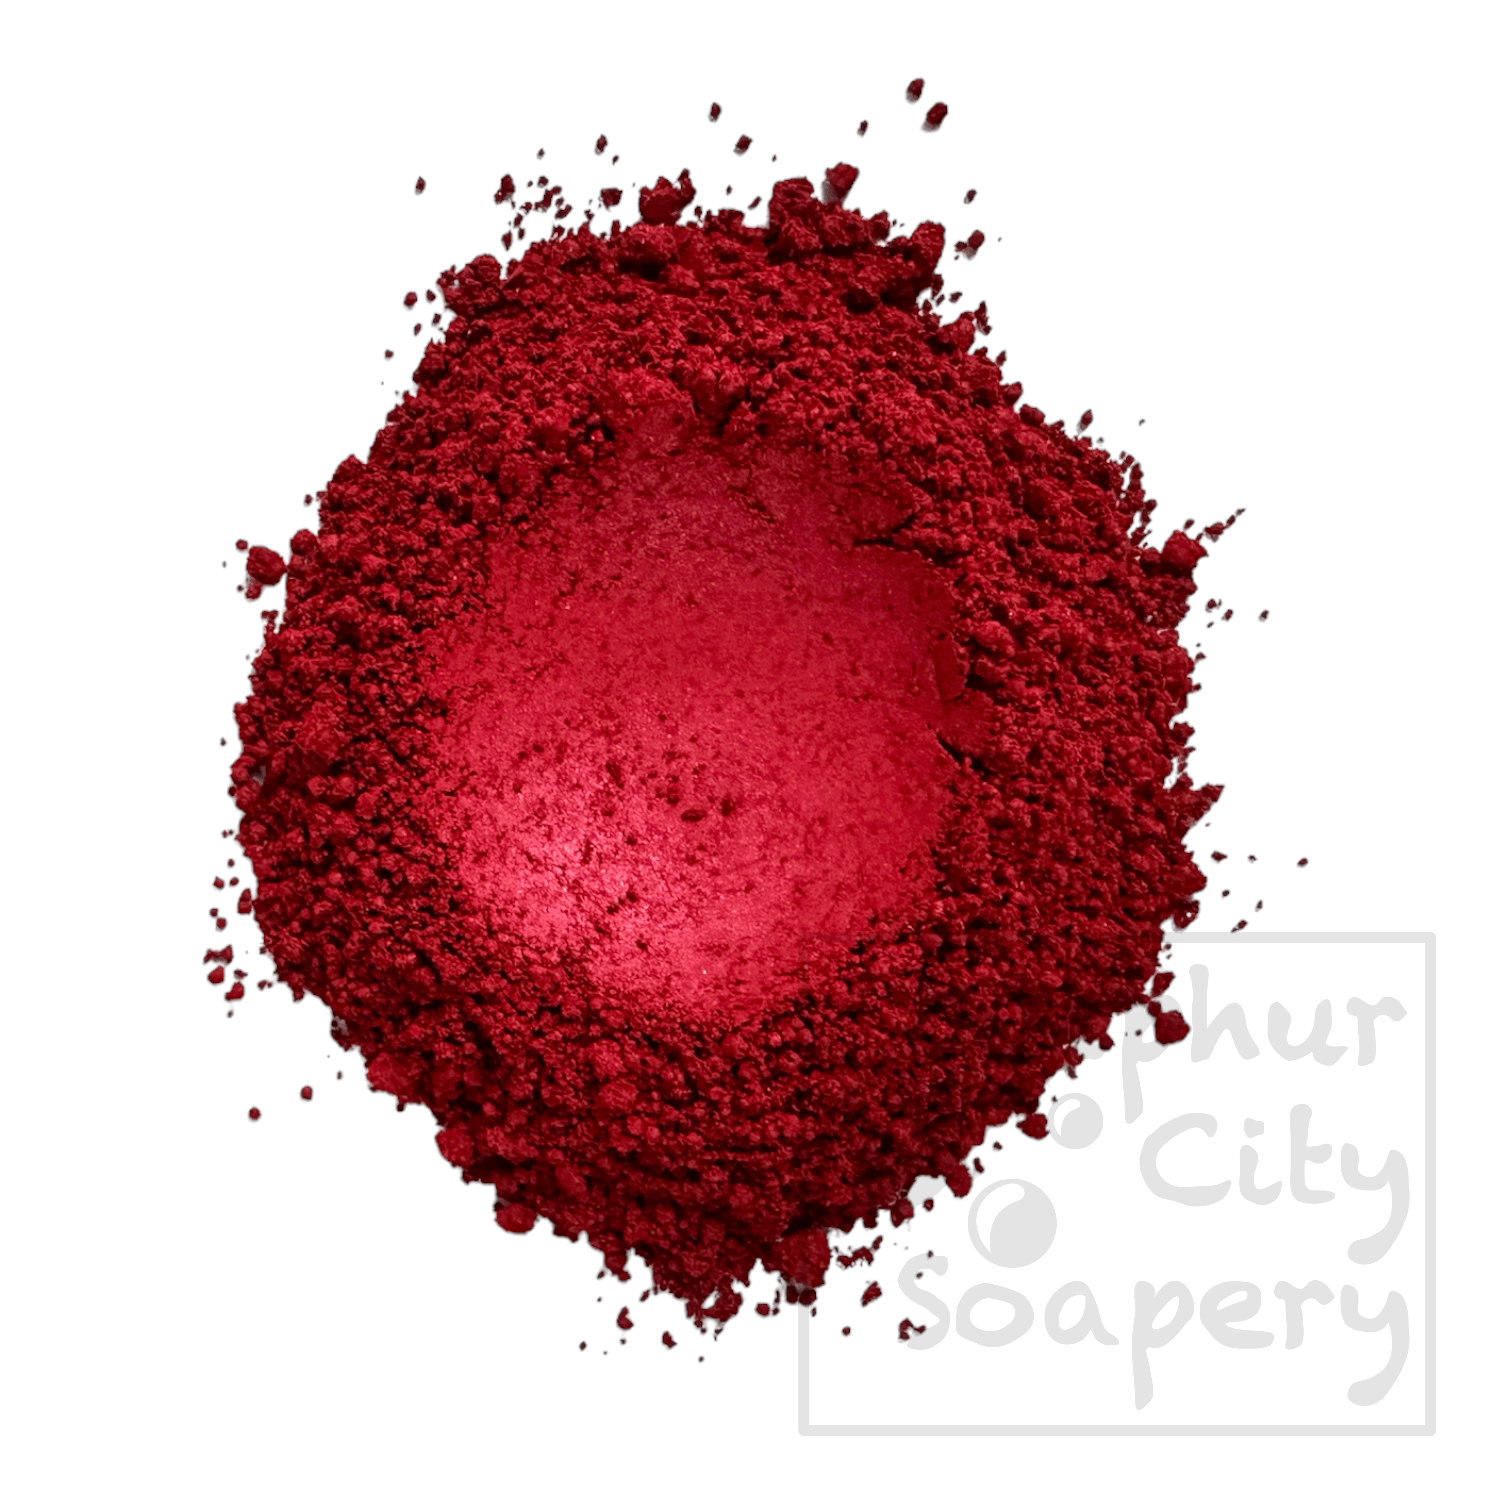 Sulphur City Soapery Red Mica - DIY soap colours.